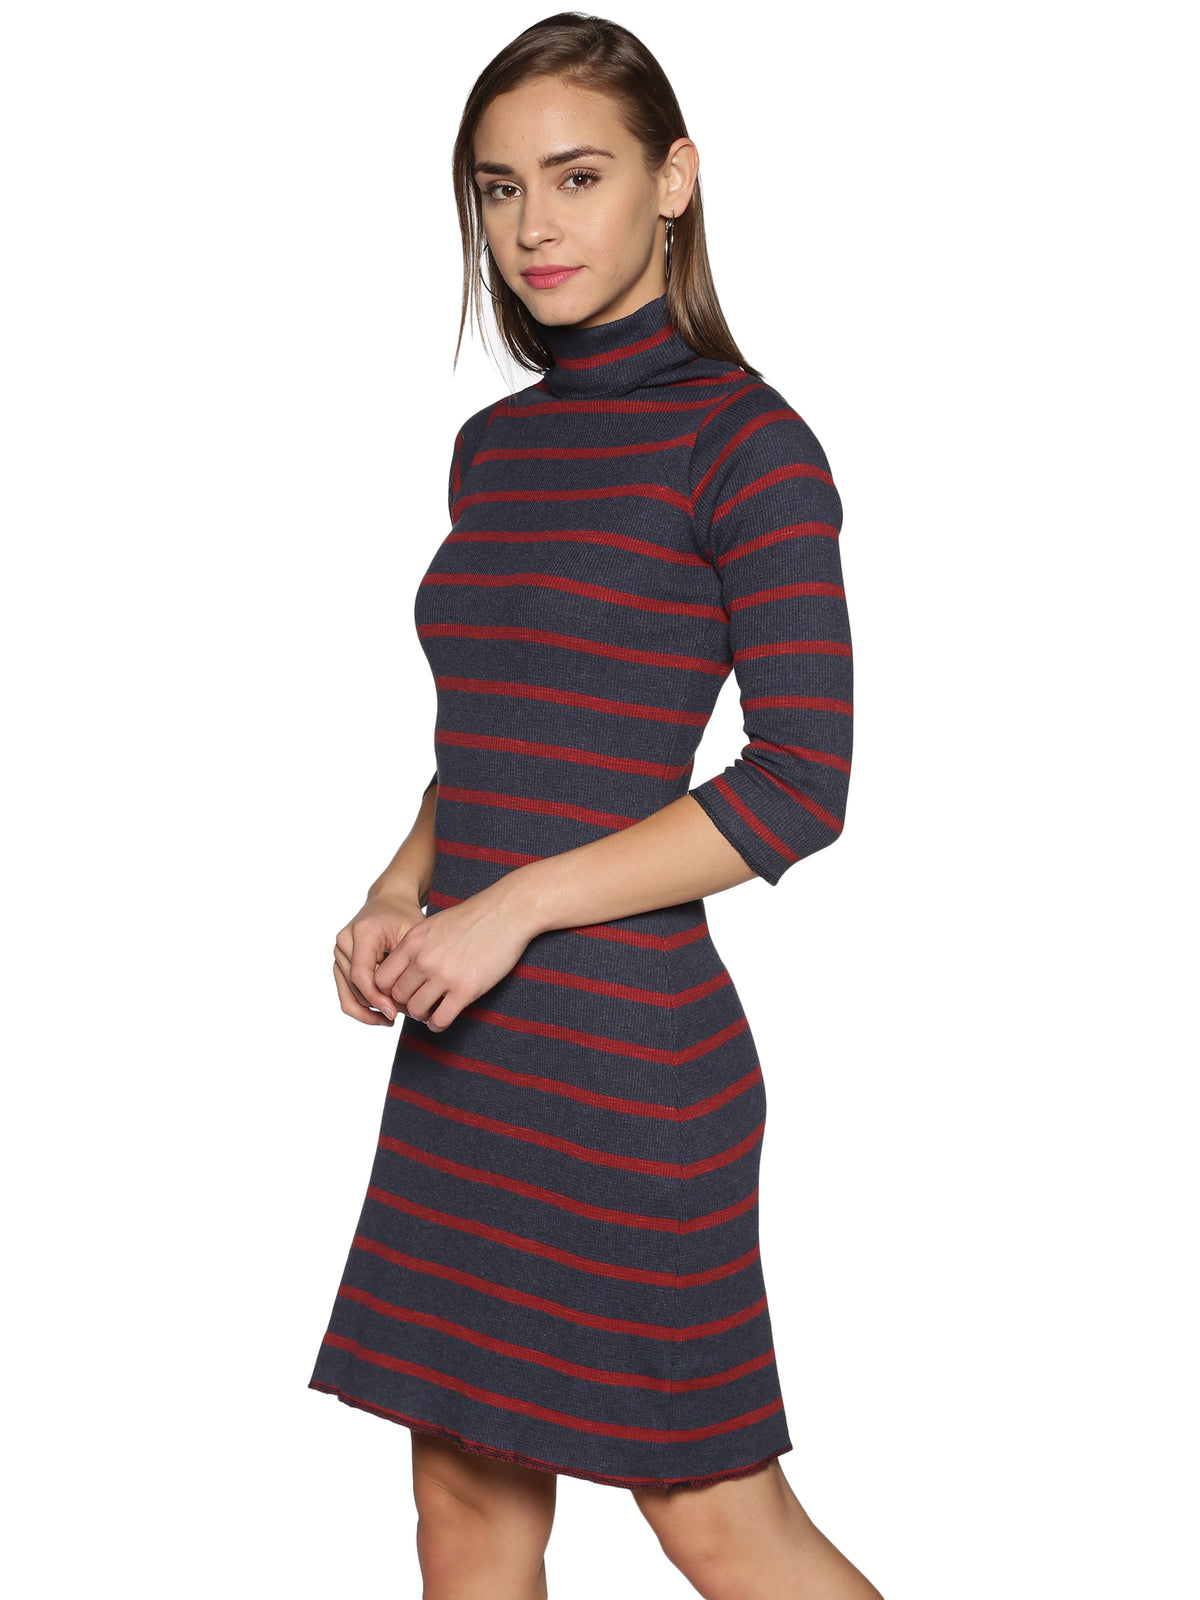 Ribbed Knit High Neck Dress in Steel Grey and Red Stripes